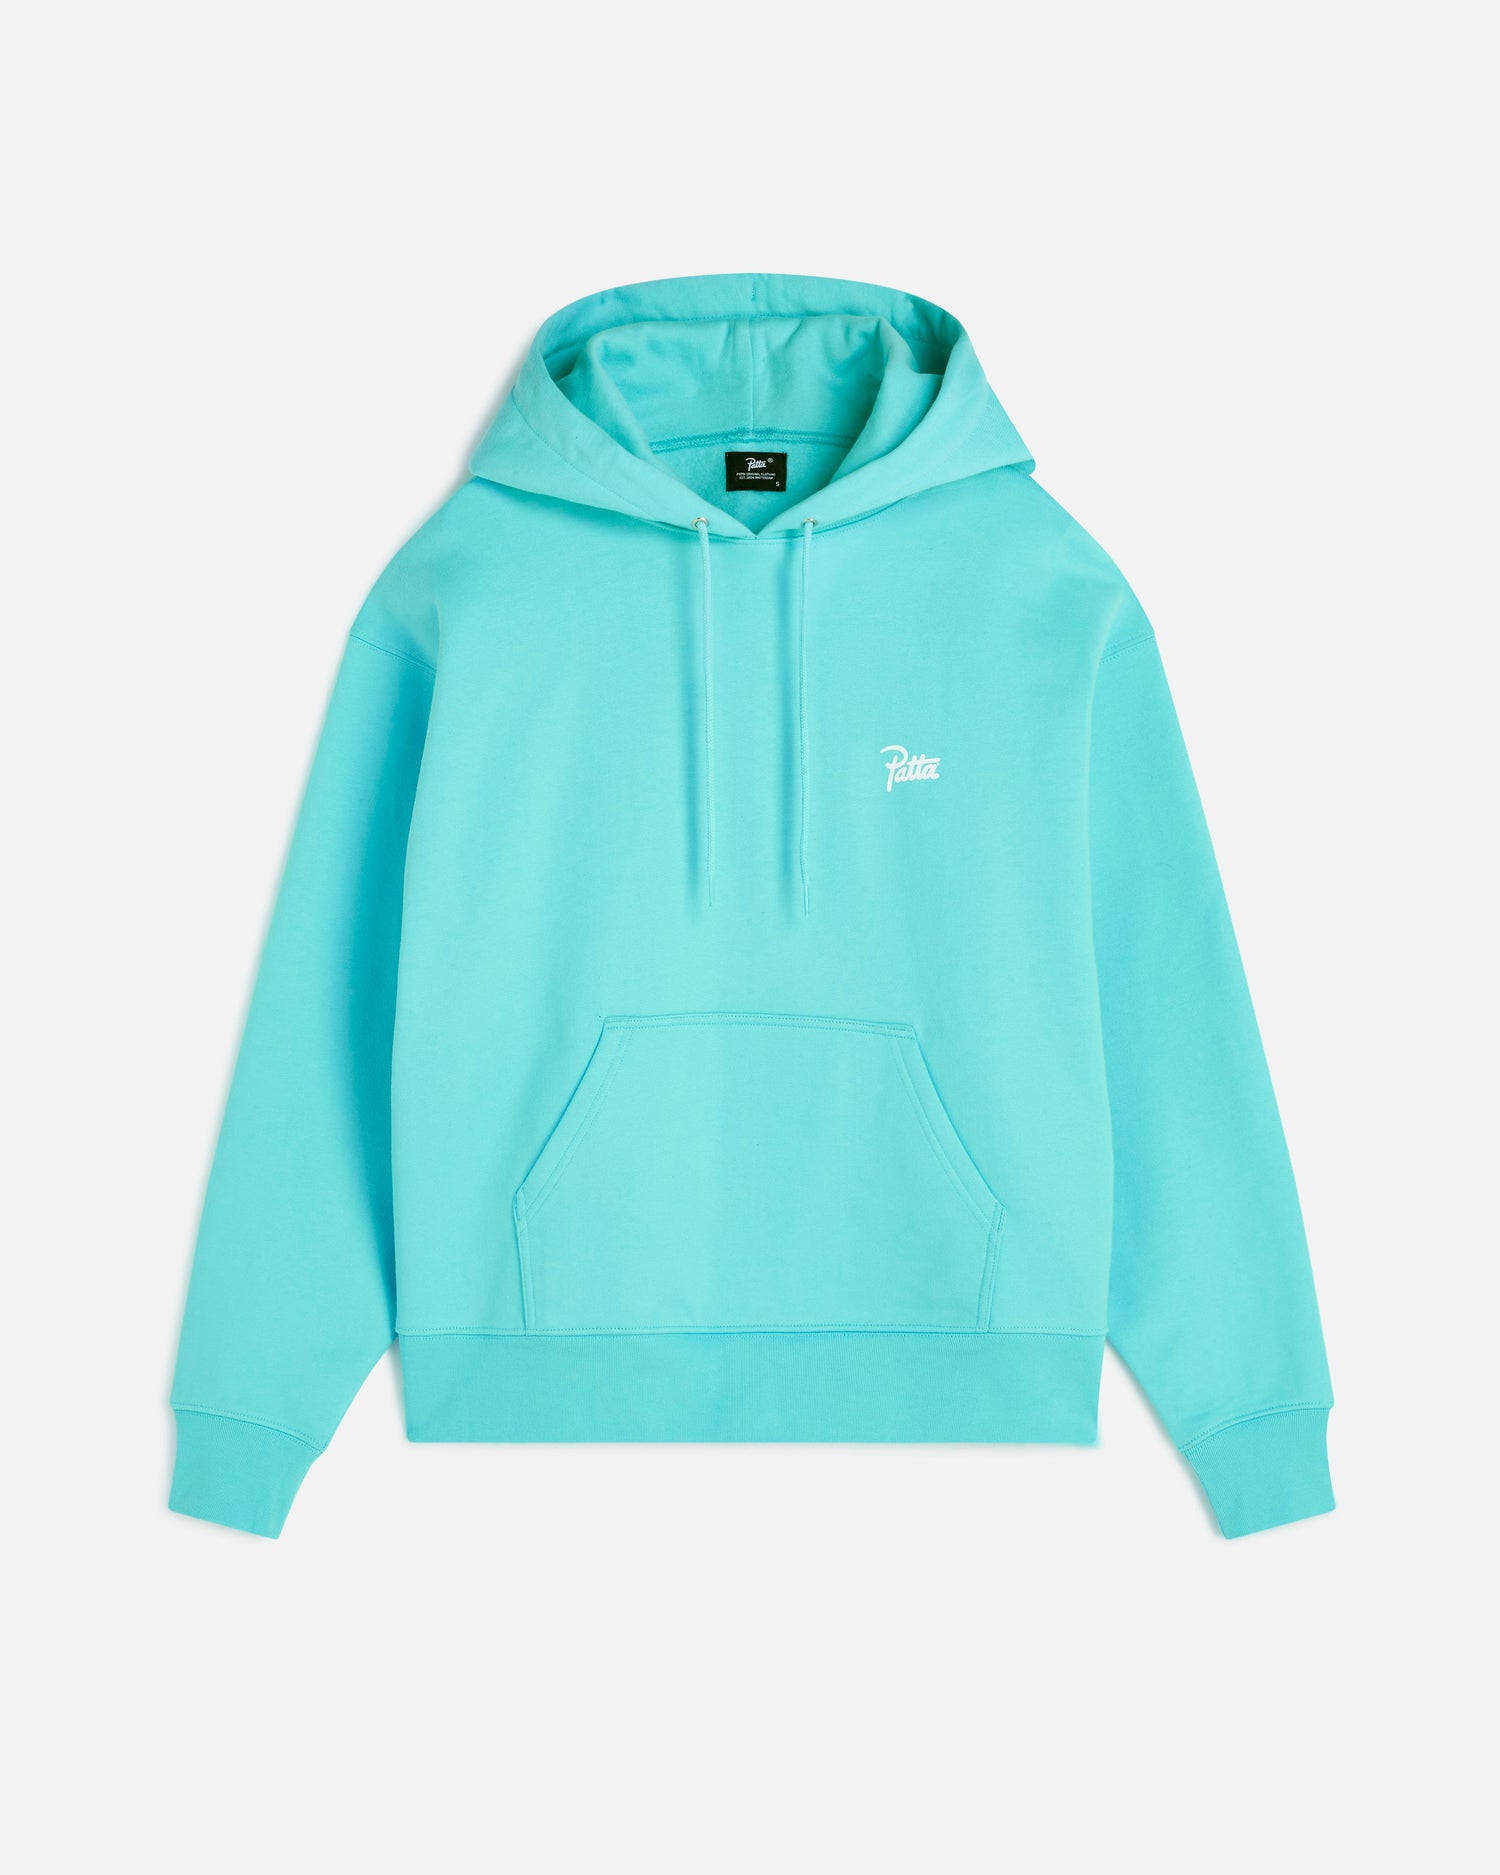 Patta Some Like It Hot Boxy Hooded Sweater (Blue Radiance)